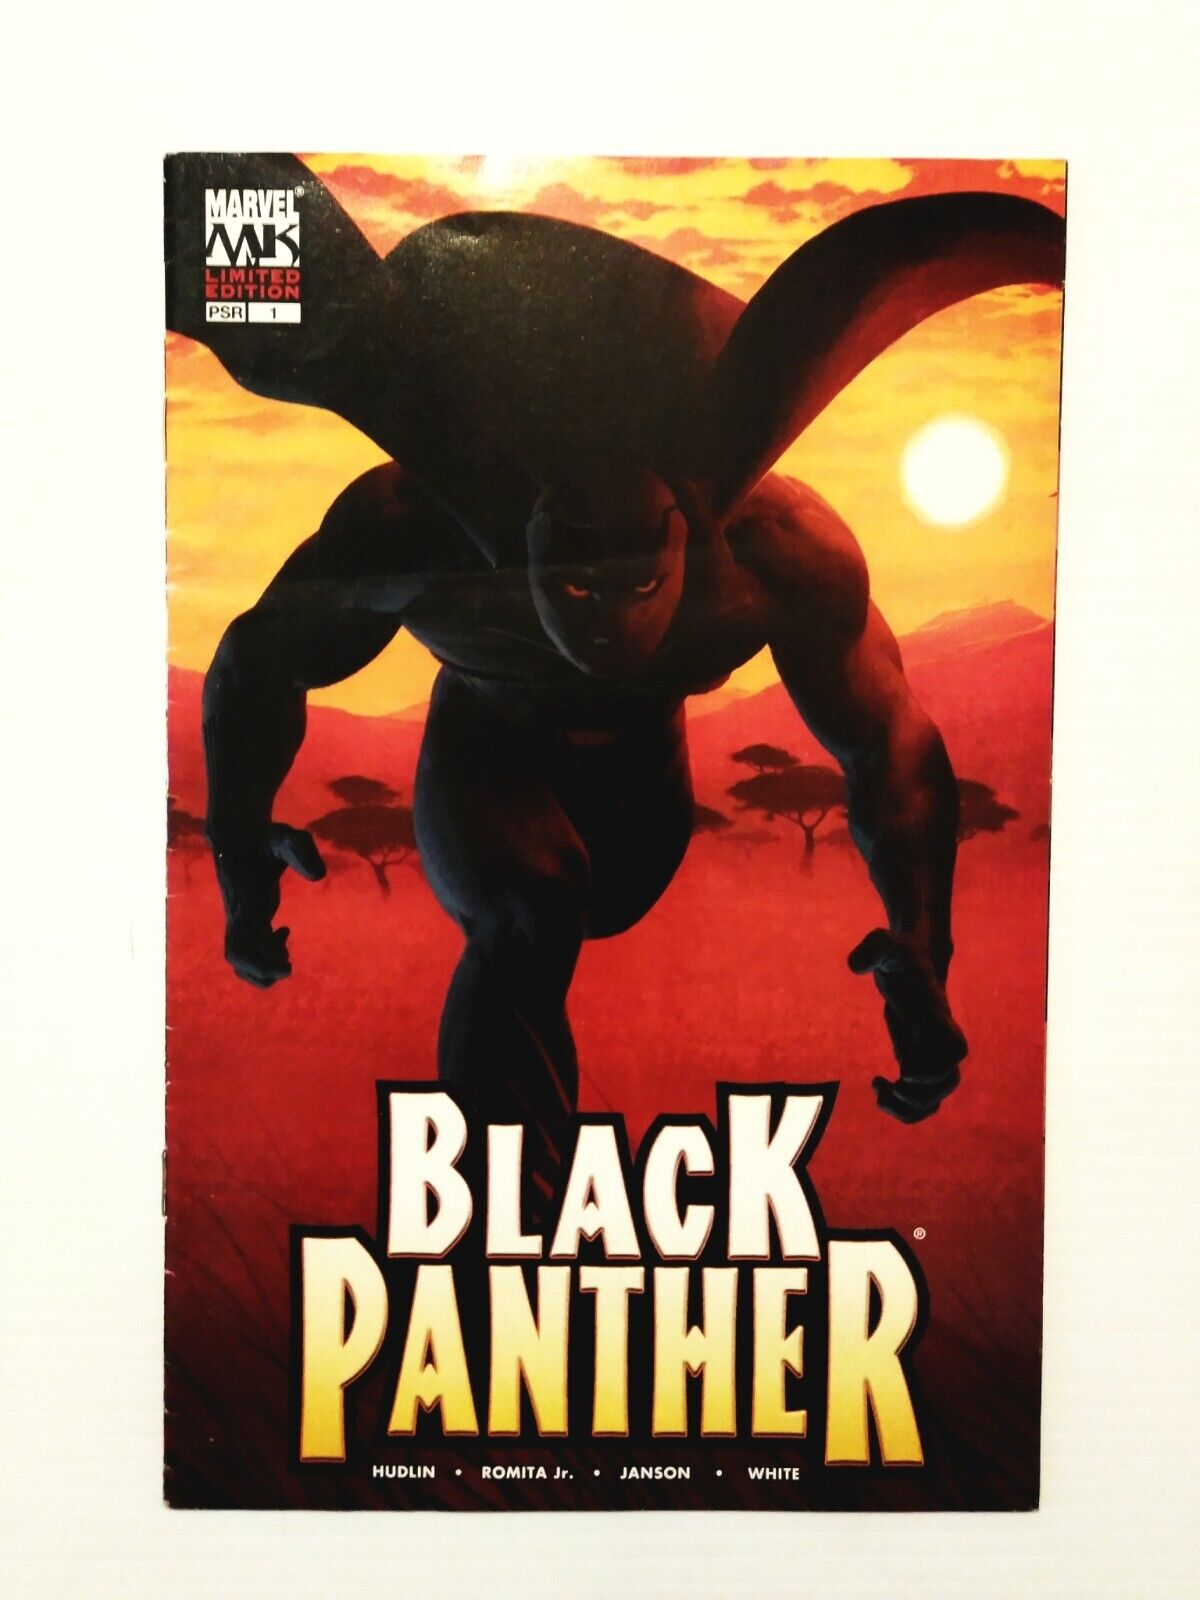 BLACK PANTHER #1  FN/VF 7.0, MARVEL KNIGHTS, RIBIC VAR, 2005, COMBINED SHIPPING